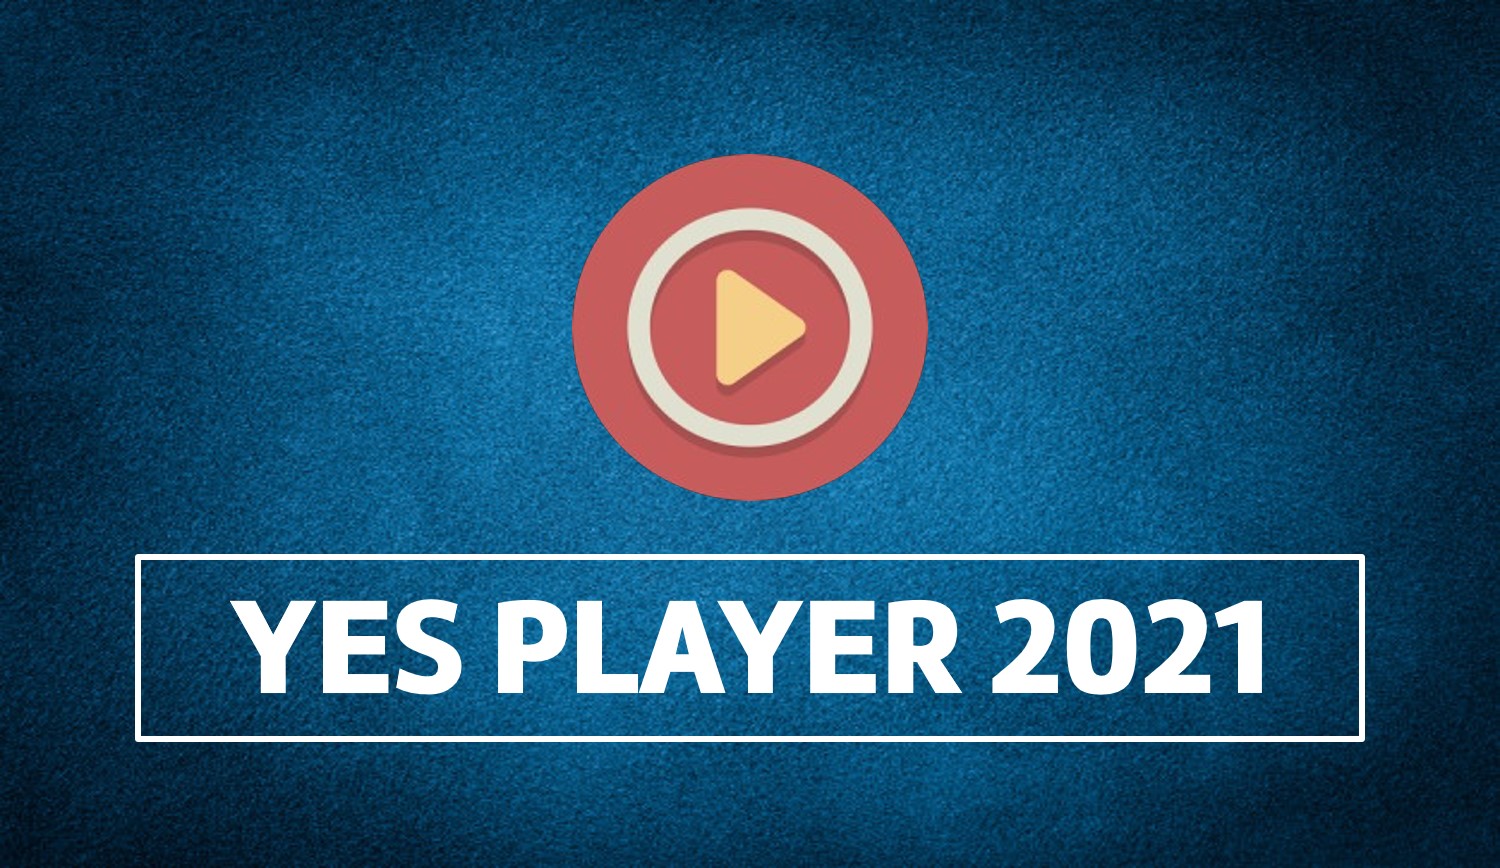 Yes Player 2021